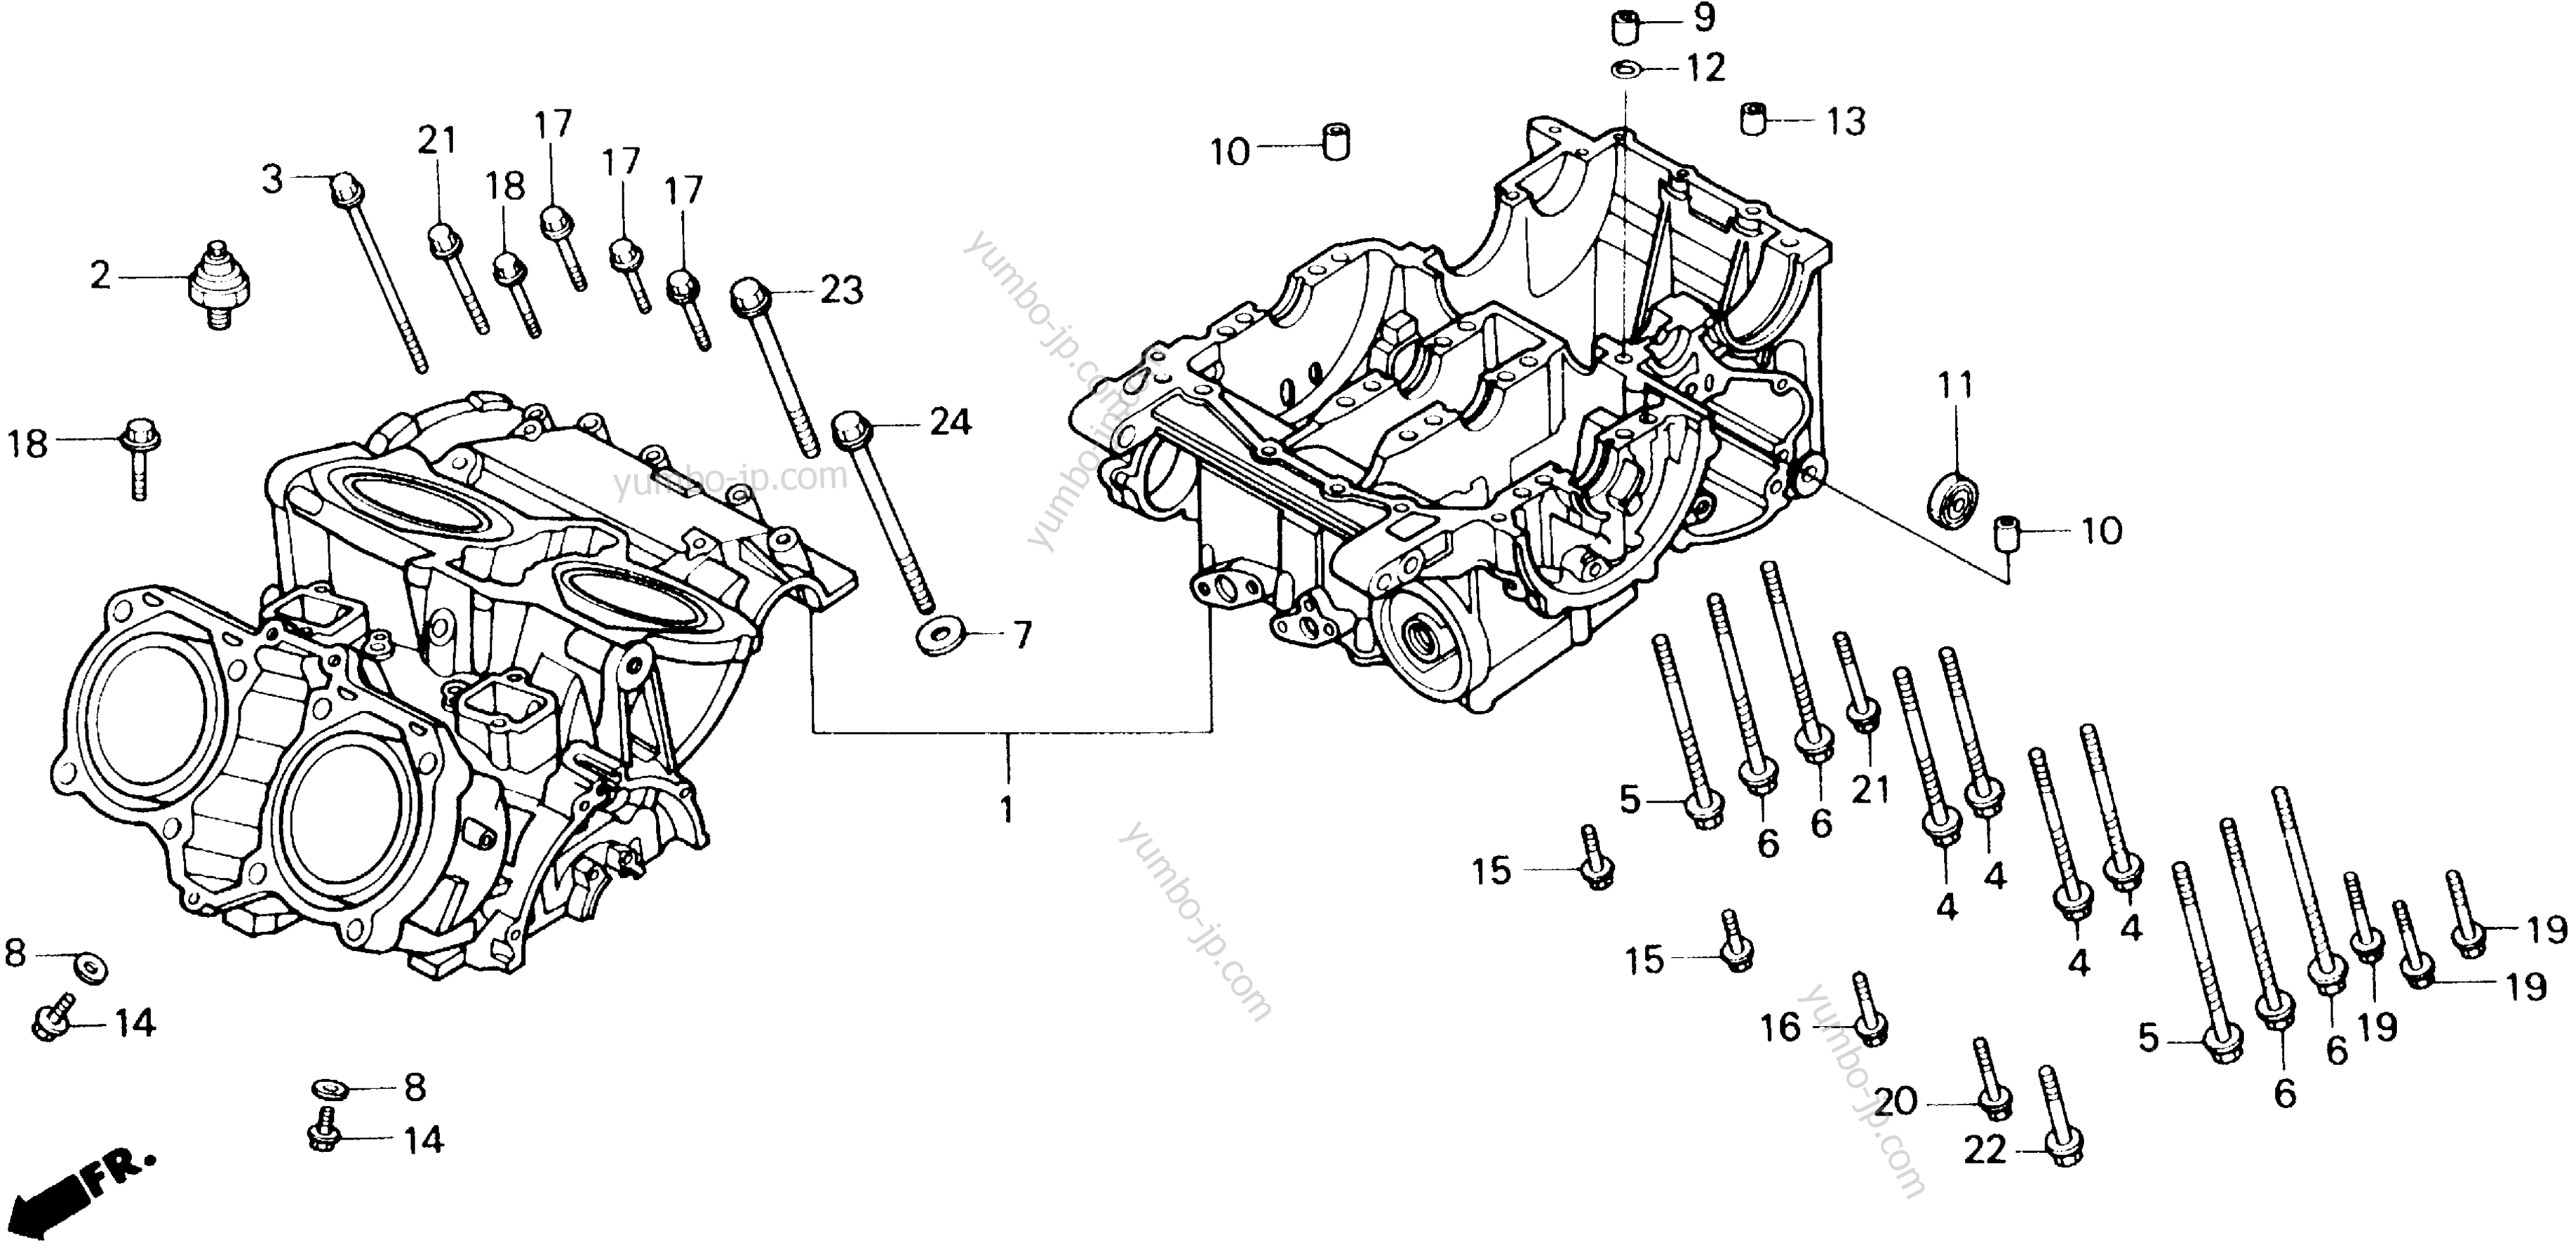 CRANKCASE for motorcycles HONDA VFR700F2 A 1987 year